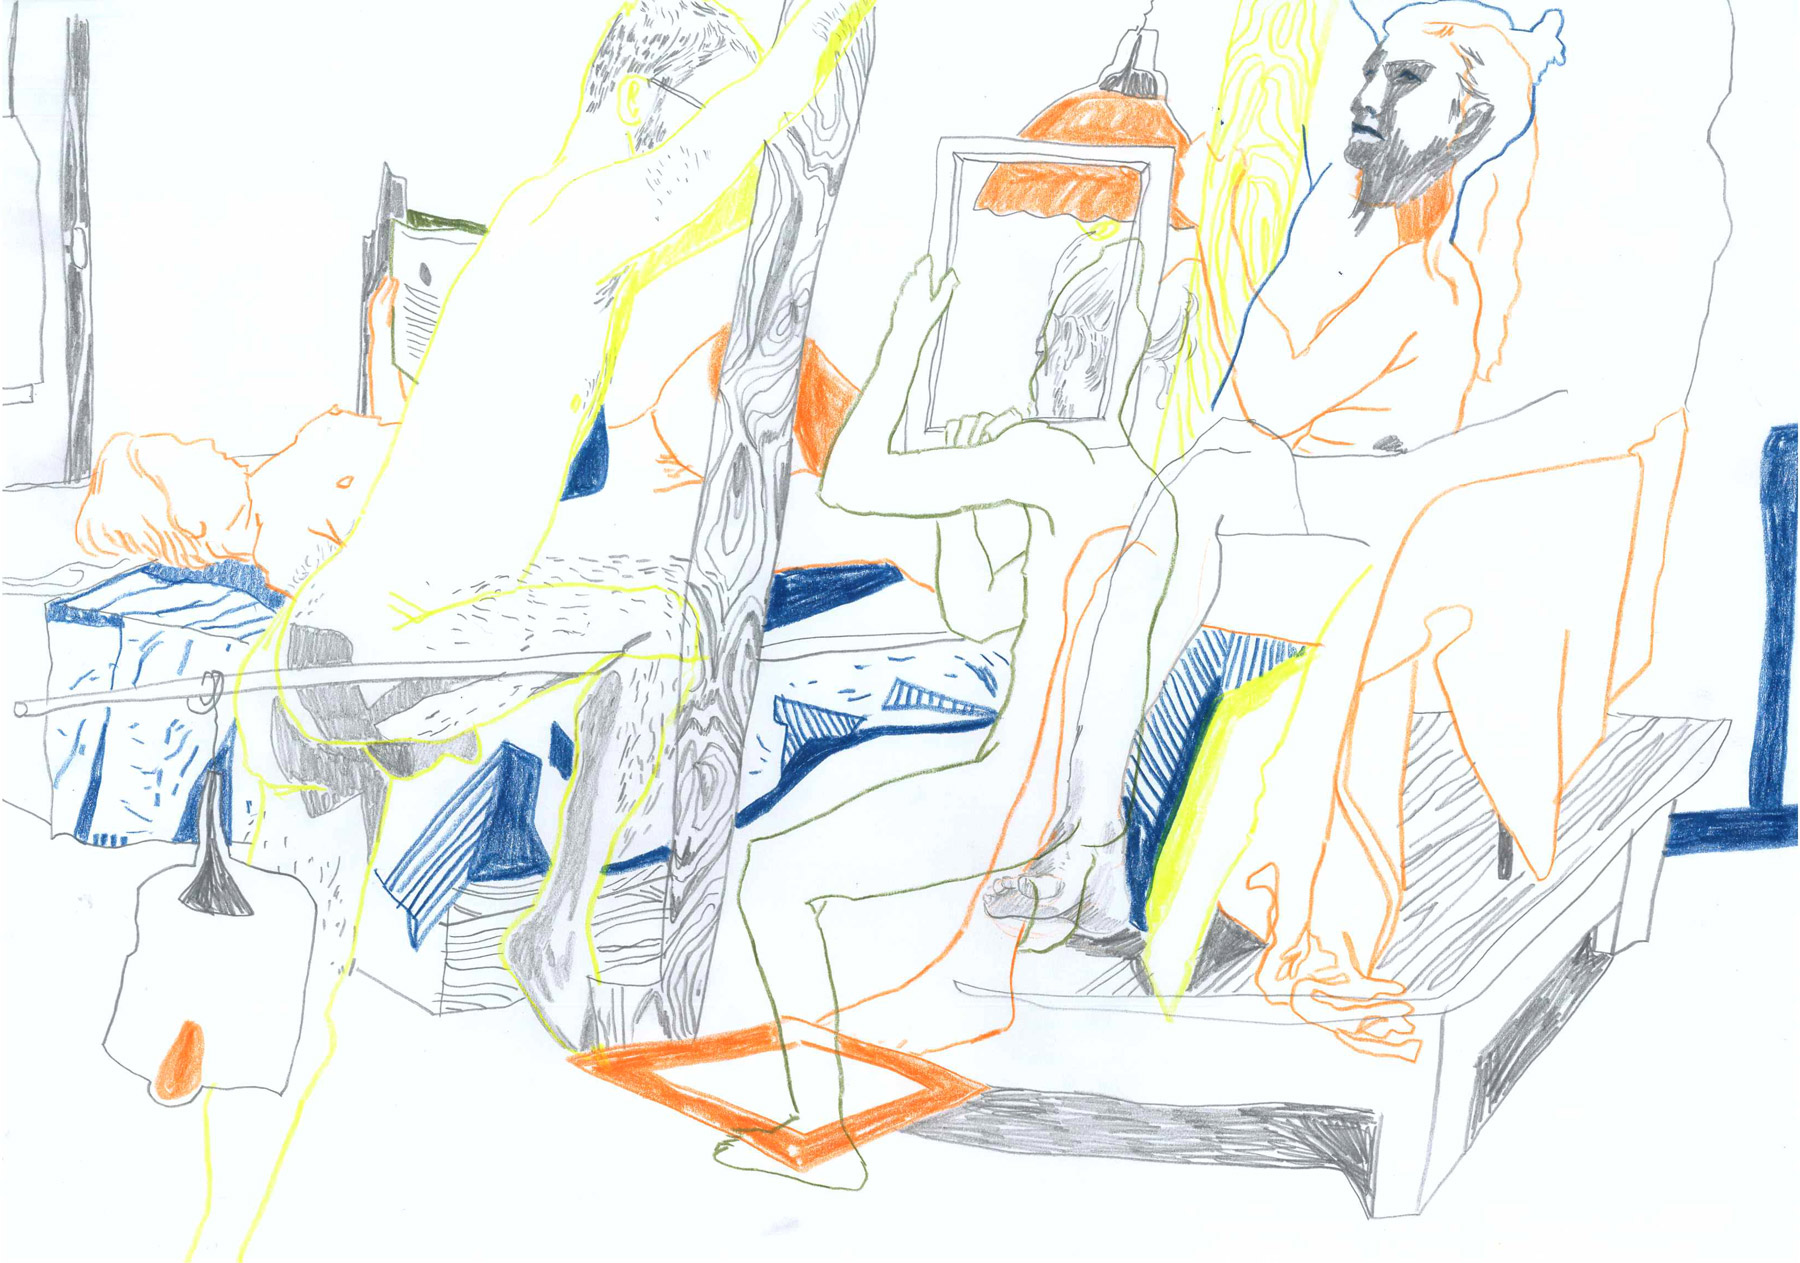 Formation mit Lampen, colored pencil on paper, 42 x 29 cm, 2019, Lisa Breyer